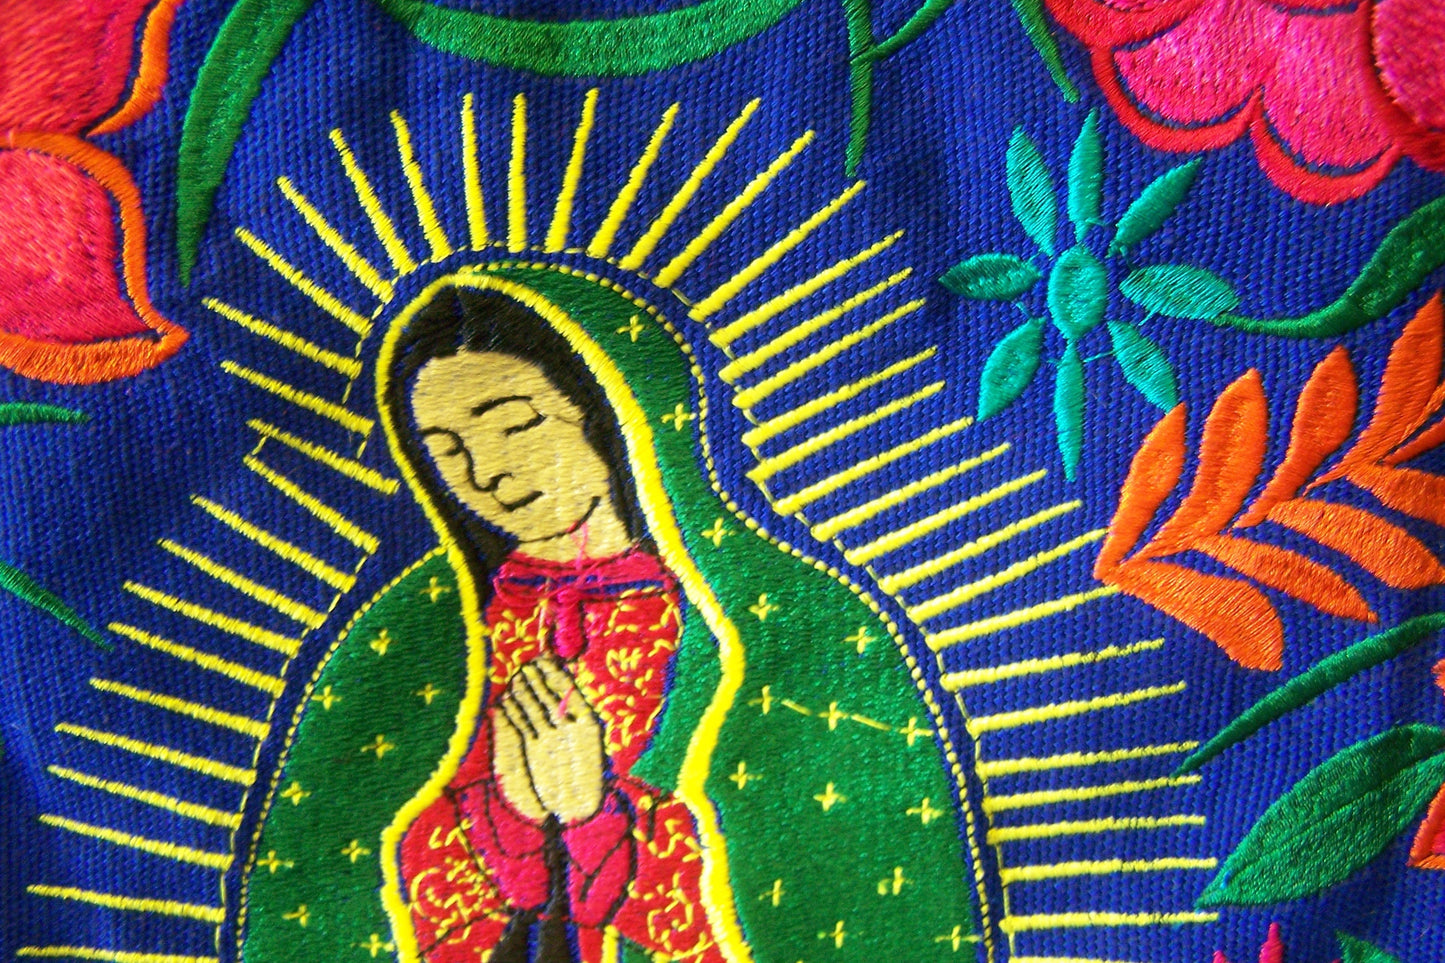 Virgin of Guadalupe Large Embroidered Leather Shoulder Bag Purse, Lined Interior, 2 Zipper Pouches - Dark Blue